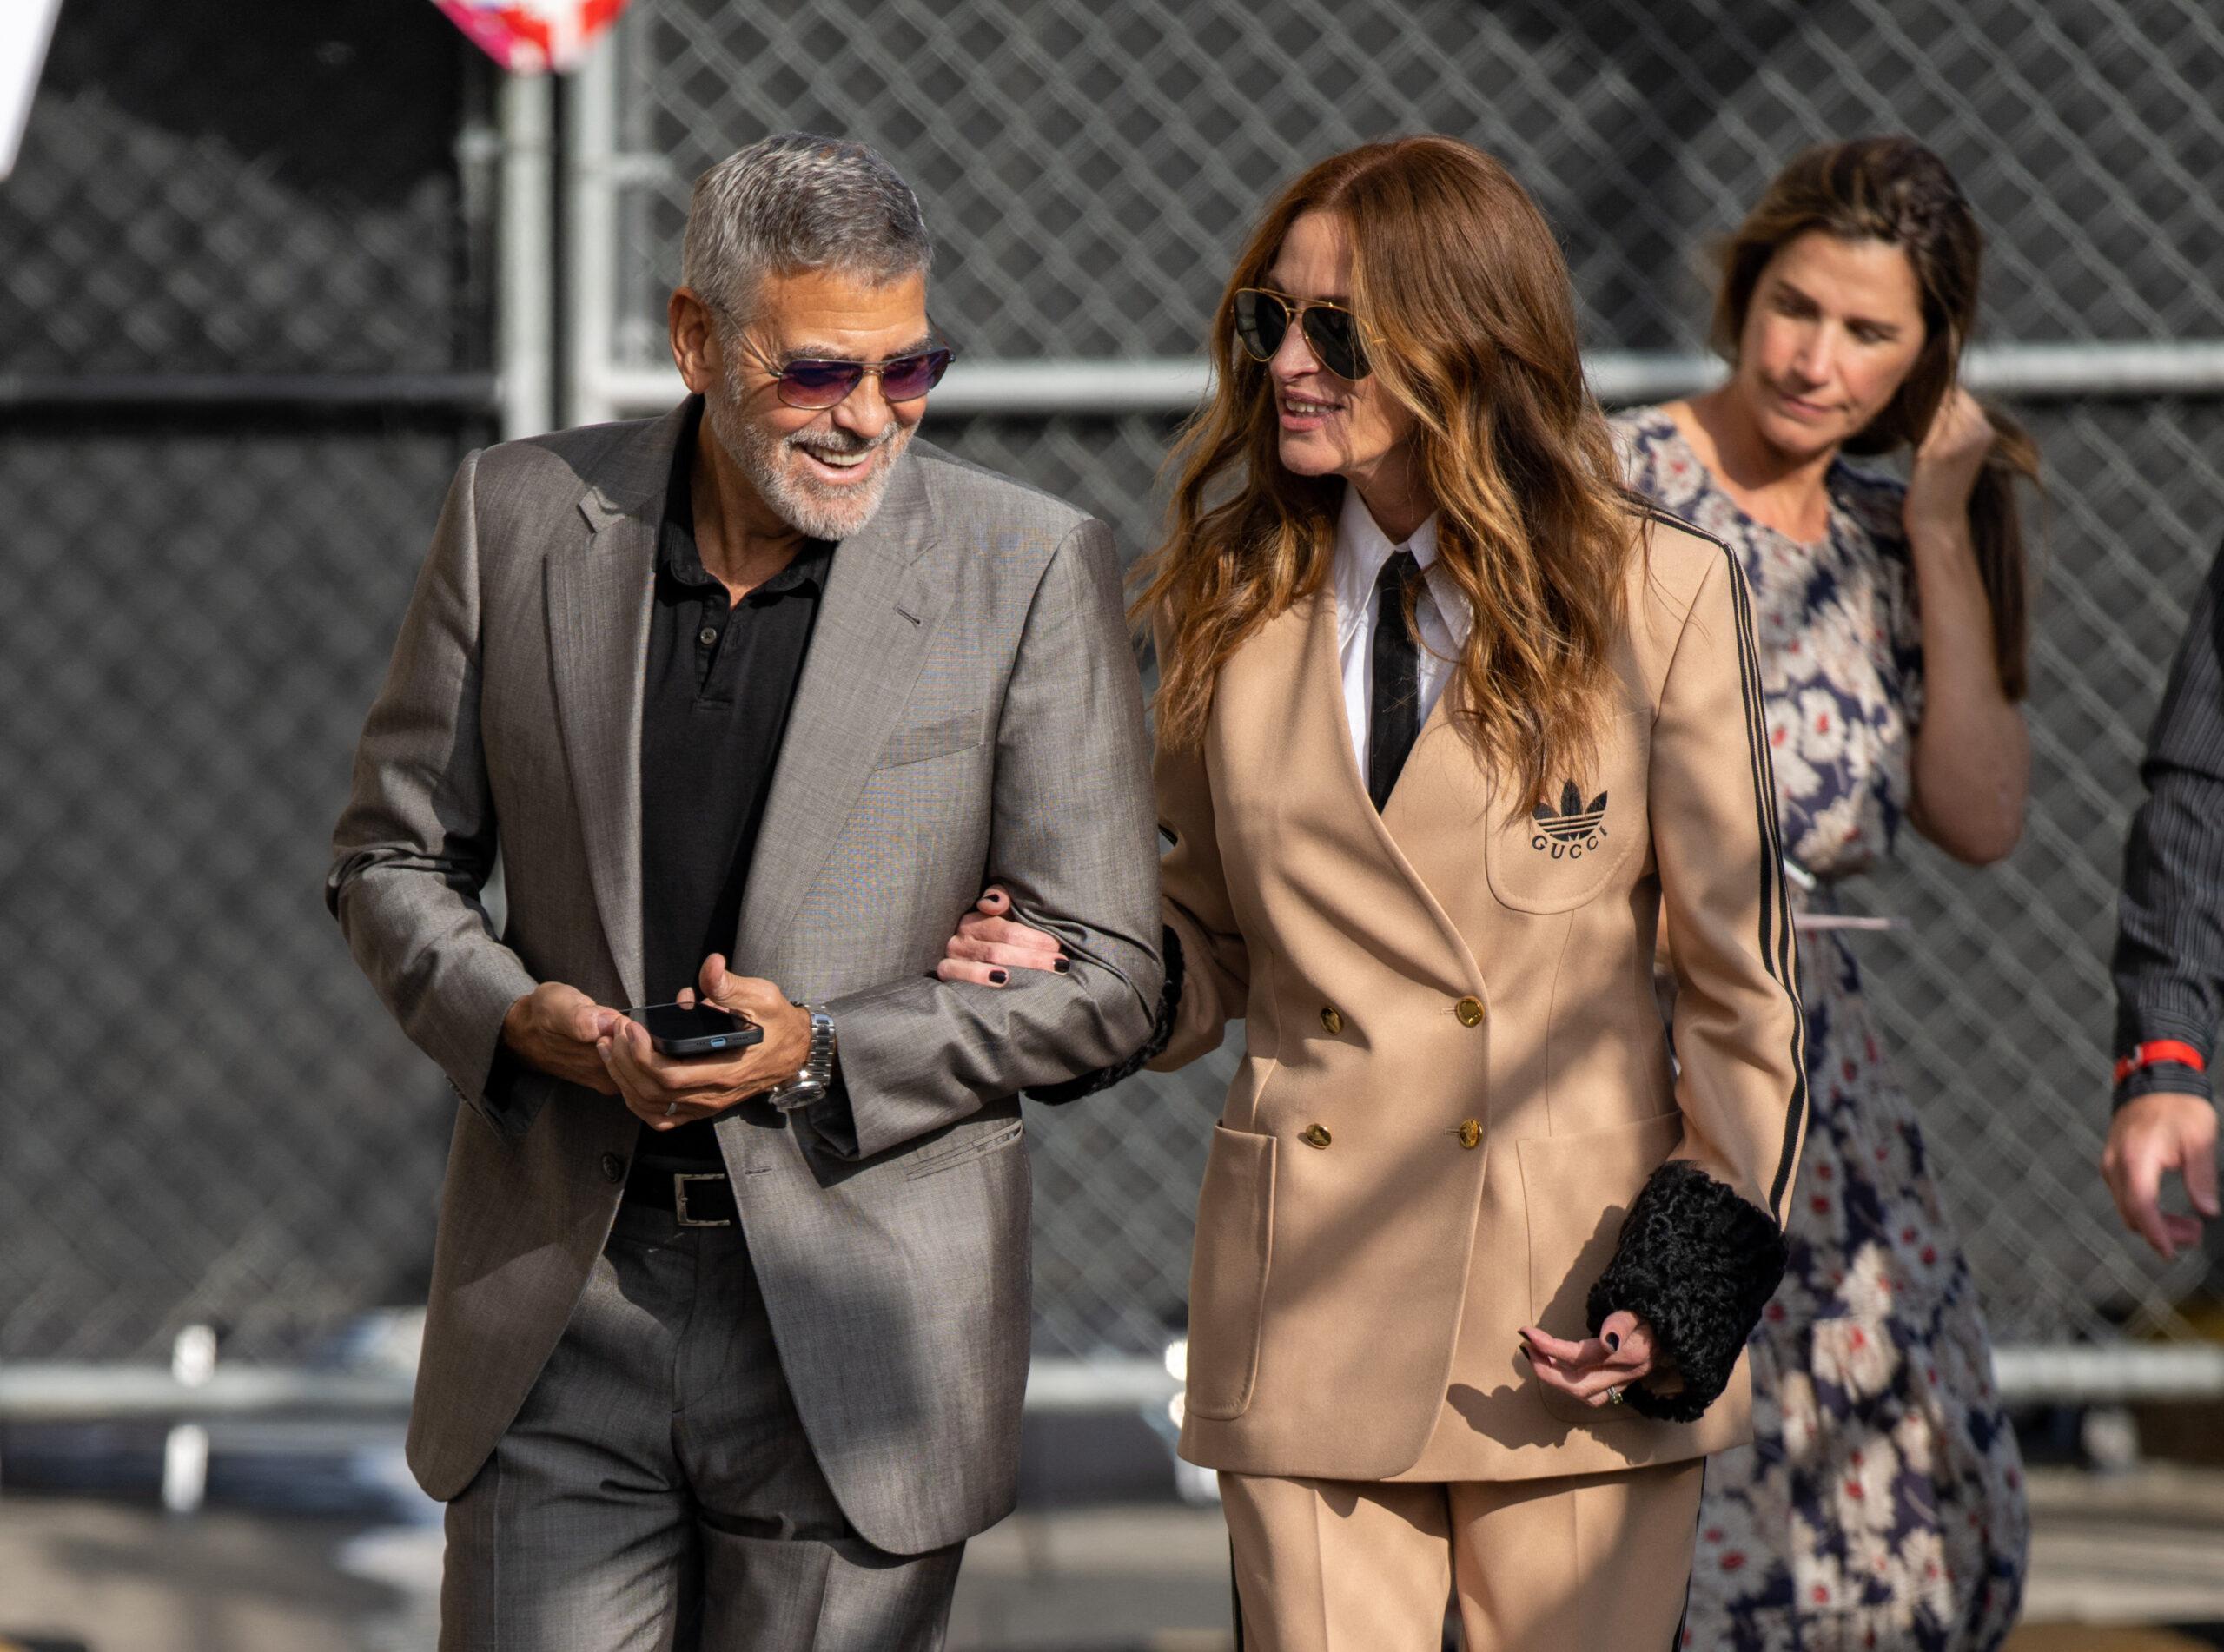 Julia Roberts just showed she's BFFs with George Clooney